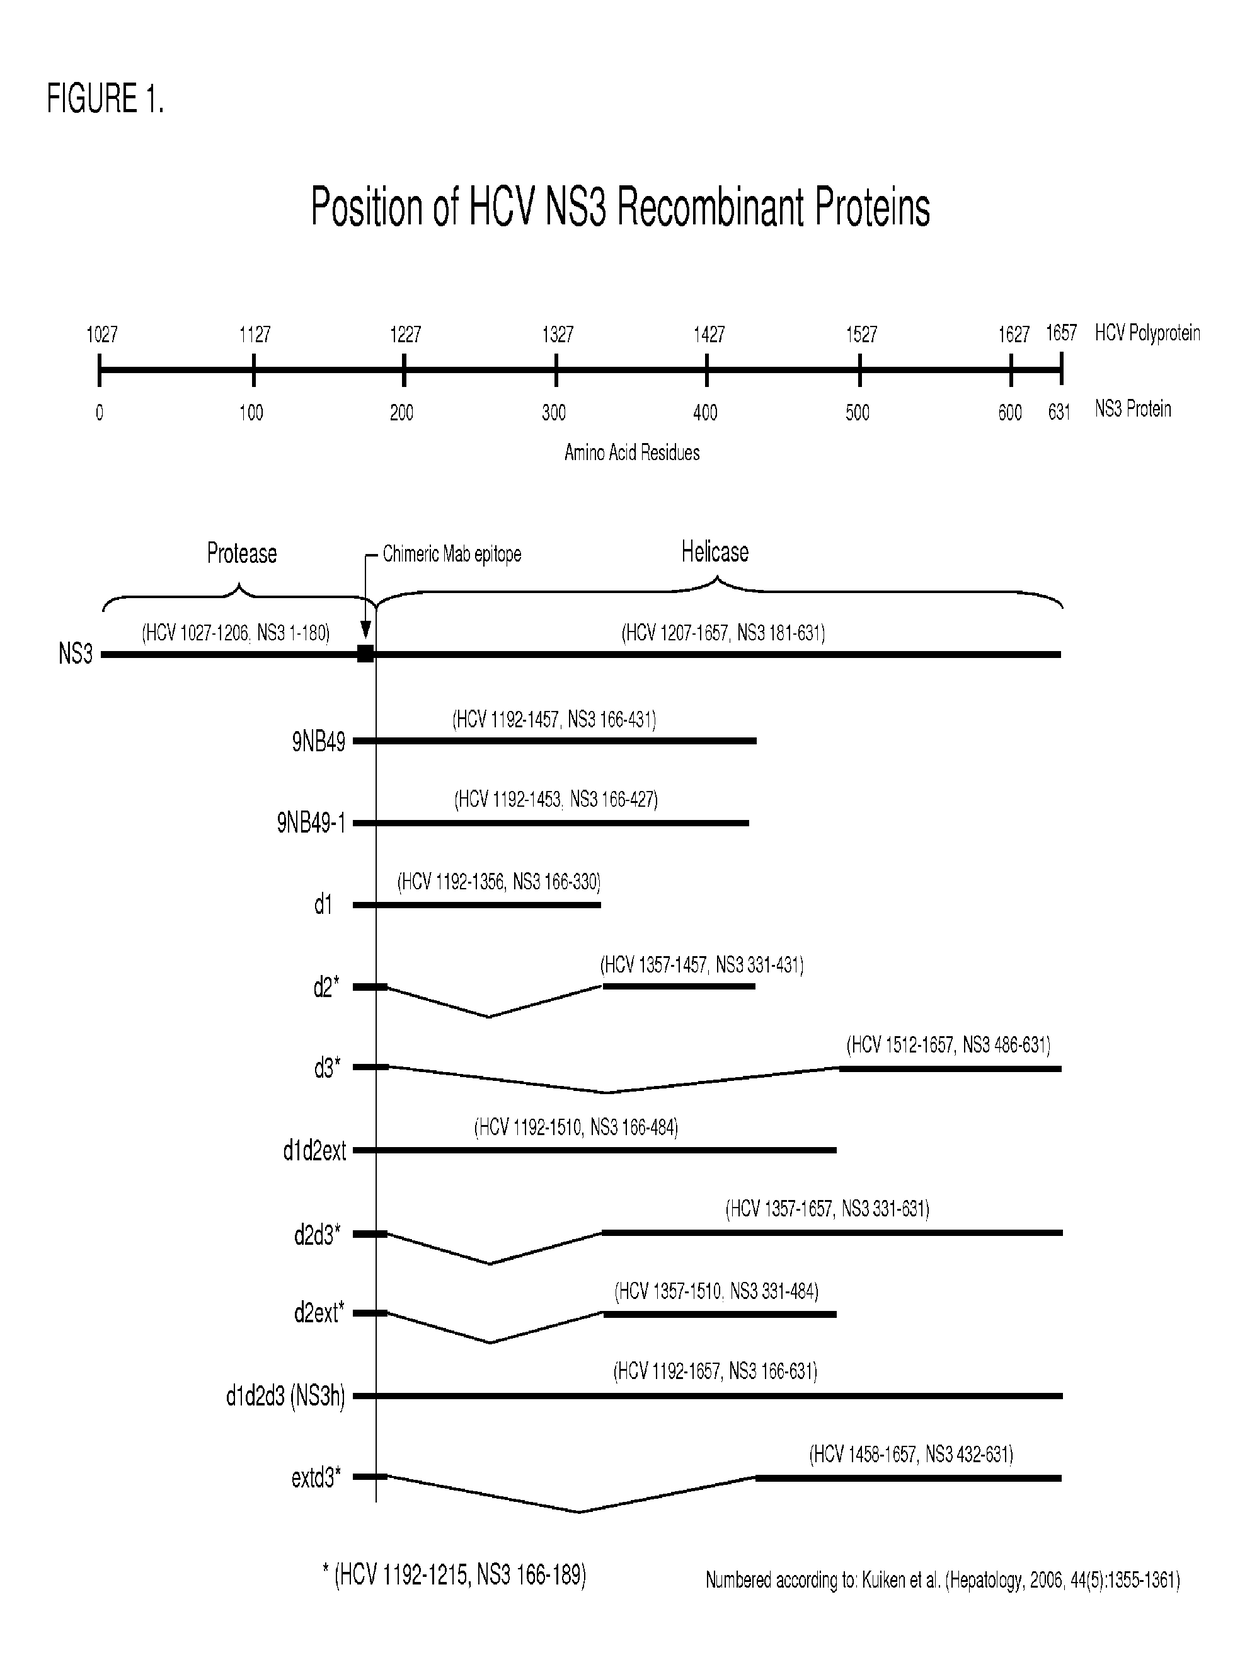 HCV NS3 recombinant antigens and mutants thereof for improved antibody detection